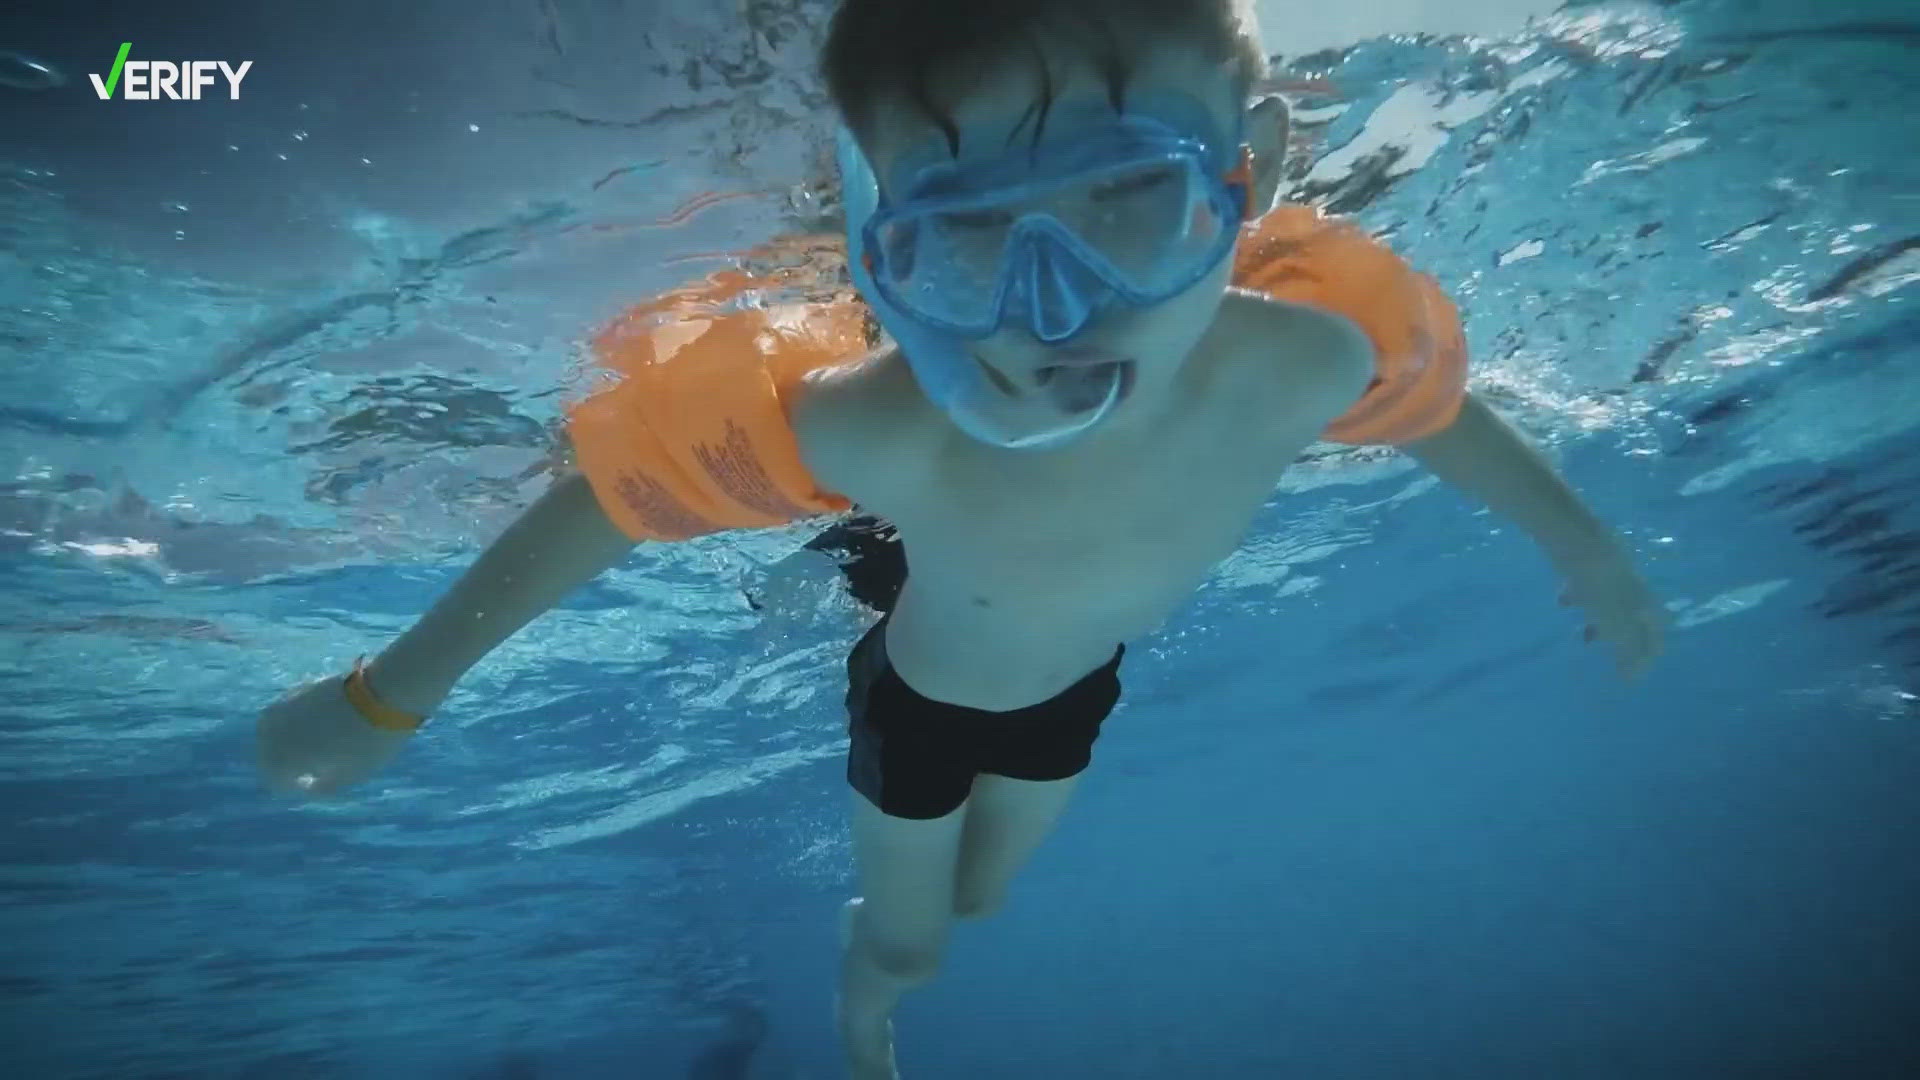 No, arm floaties or inflatable floatation devices will not prevent a child from drowning.